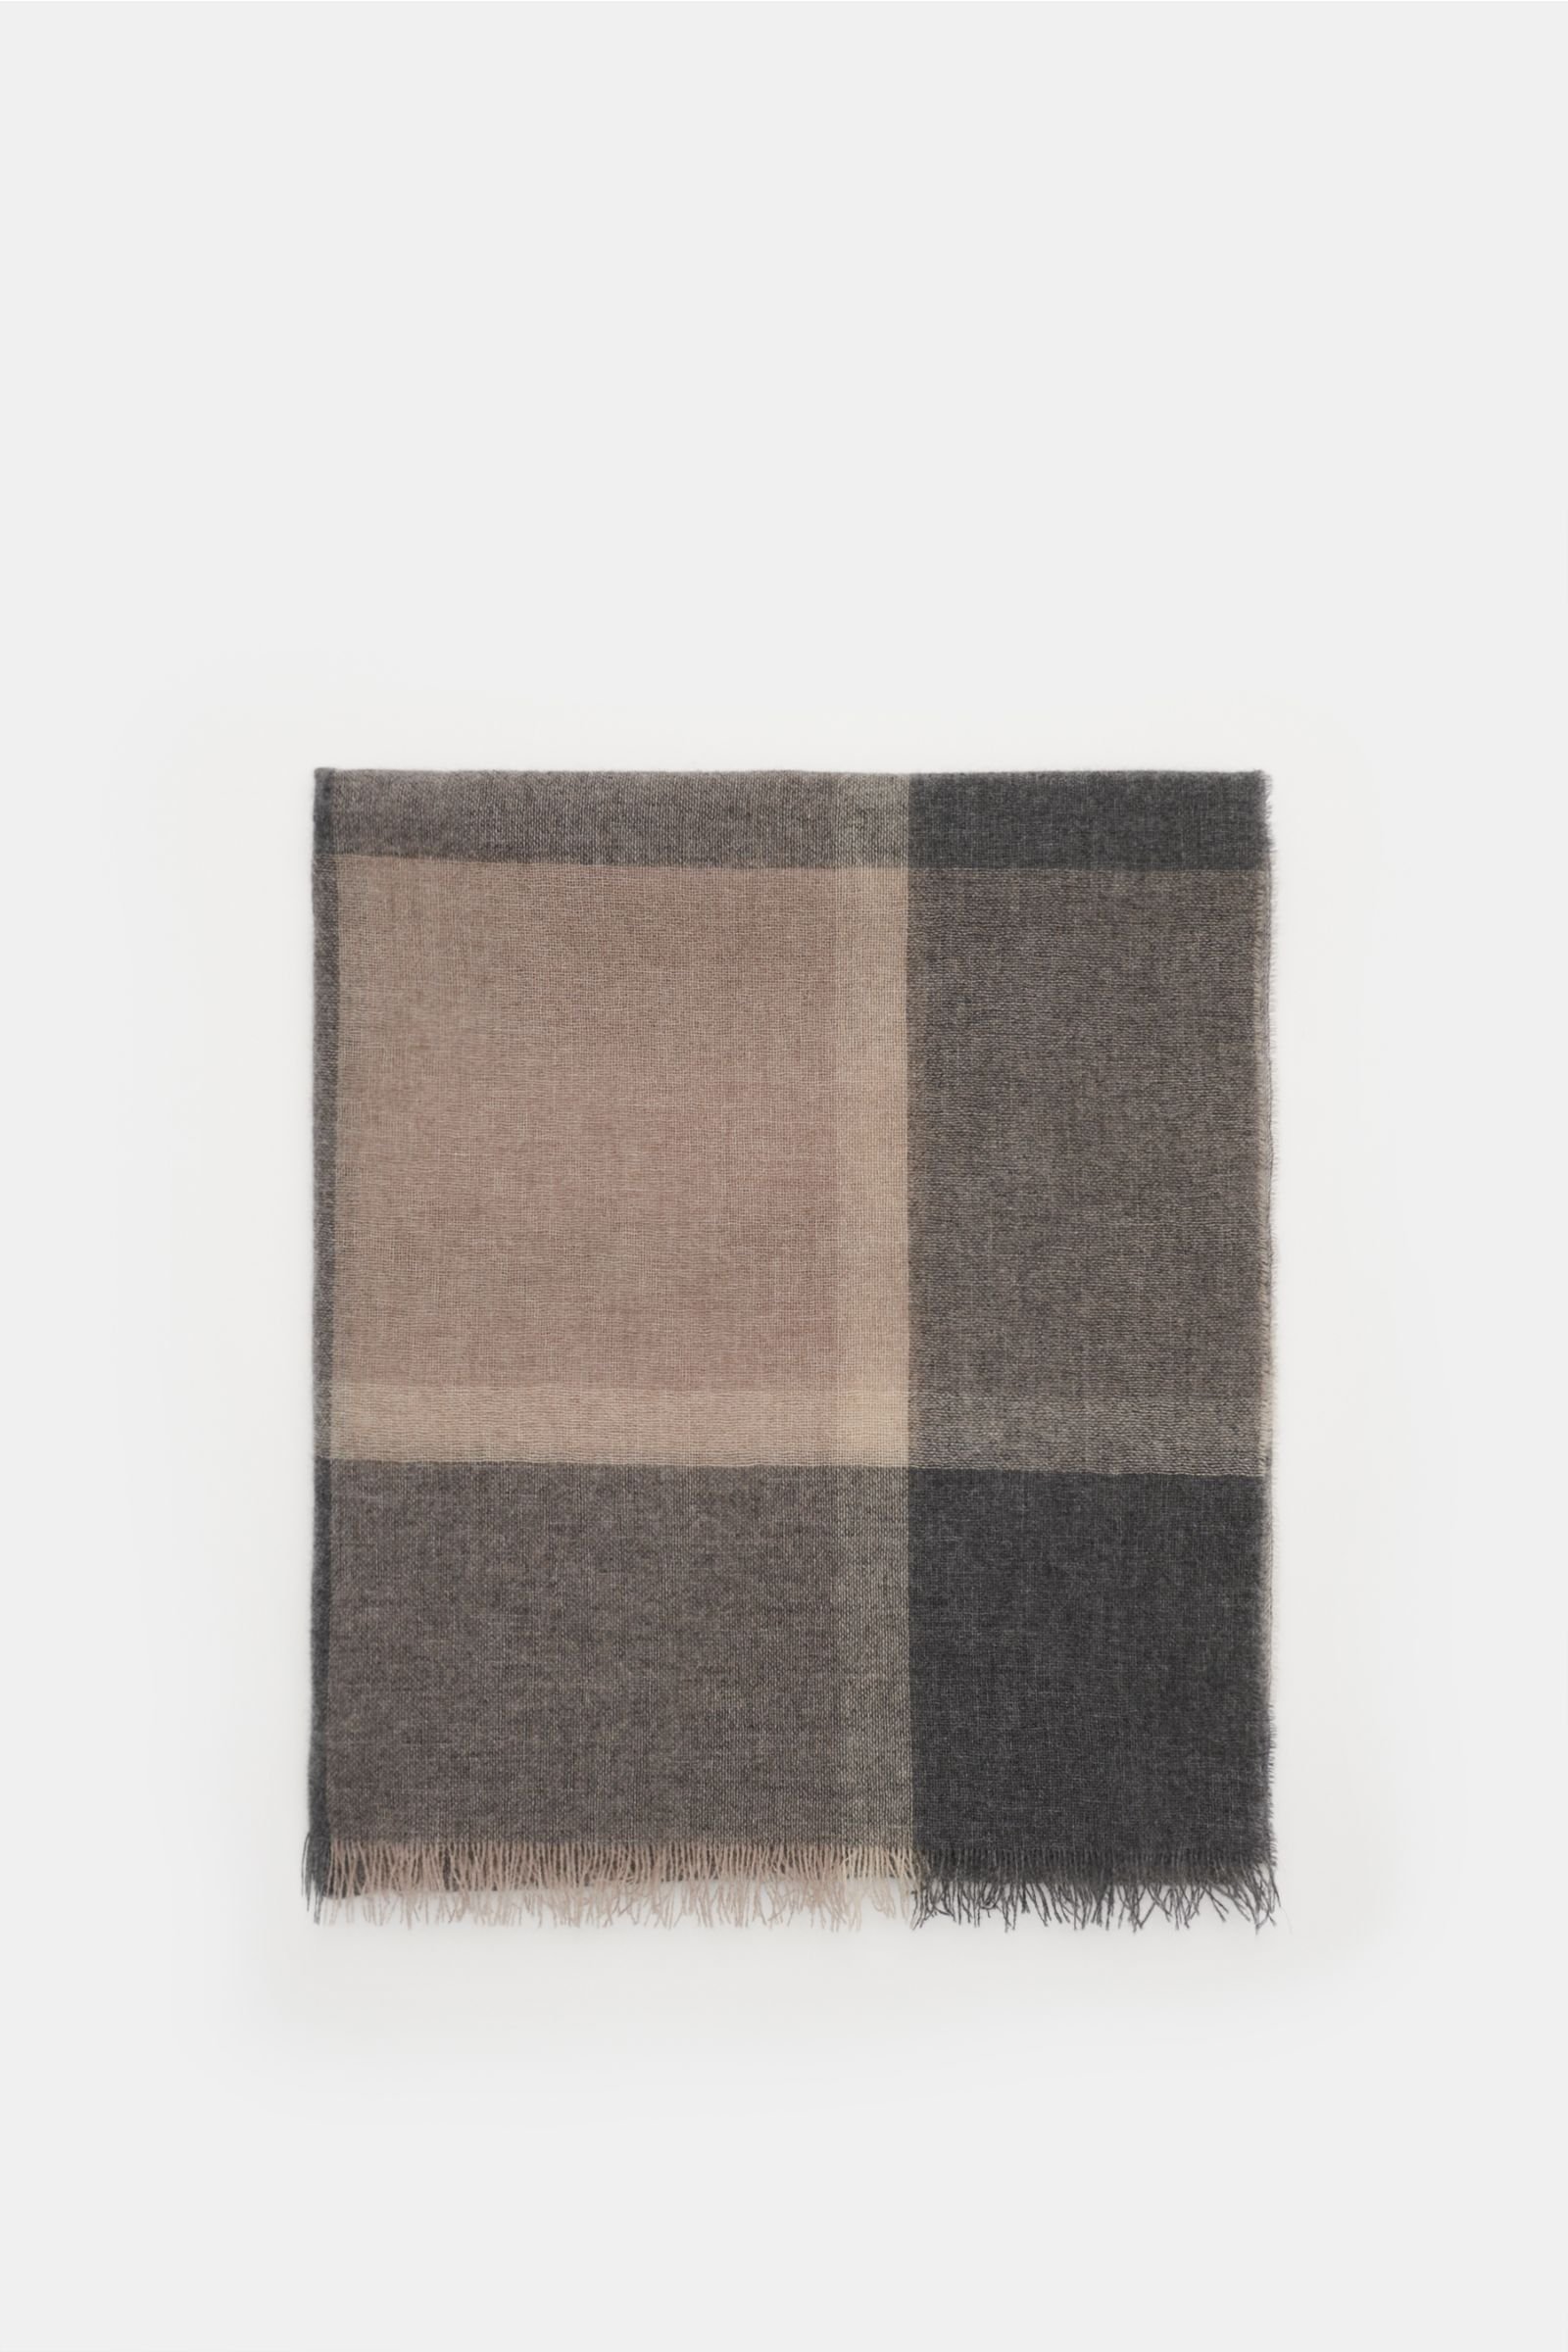 Cashmere scarf 'Ortisei' beige/grey, checked